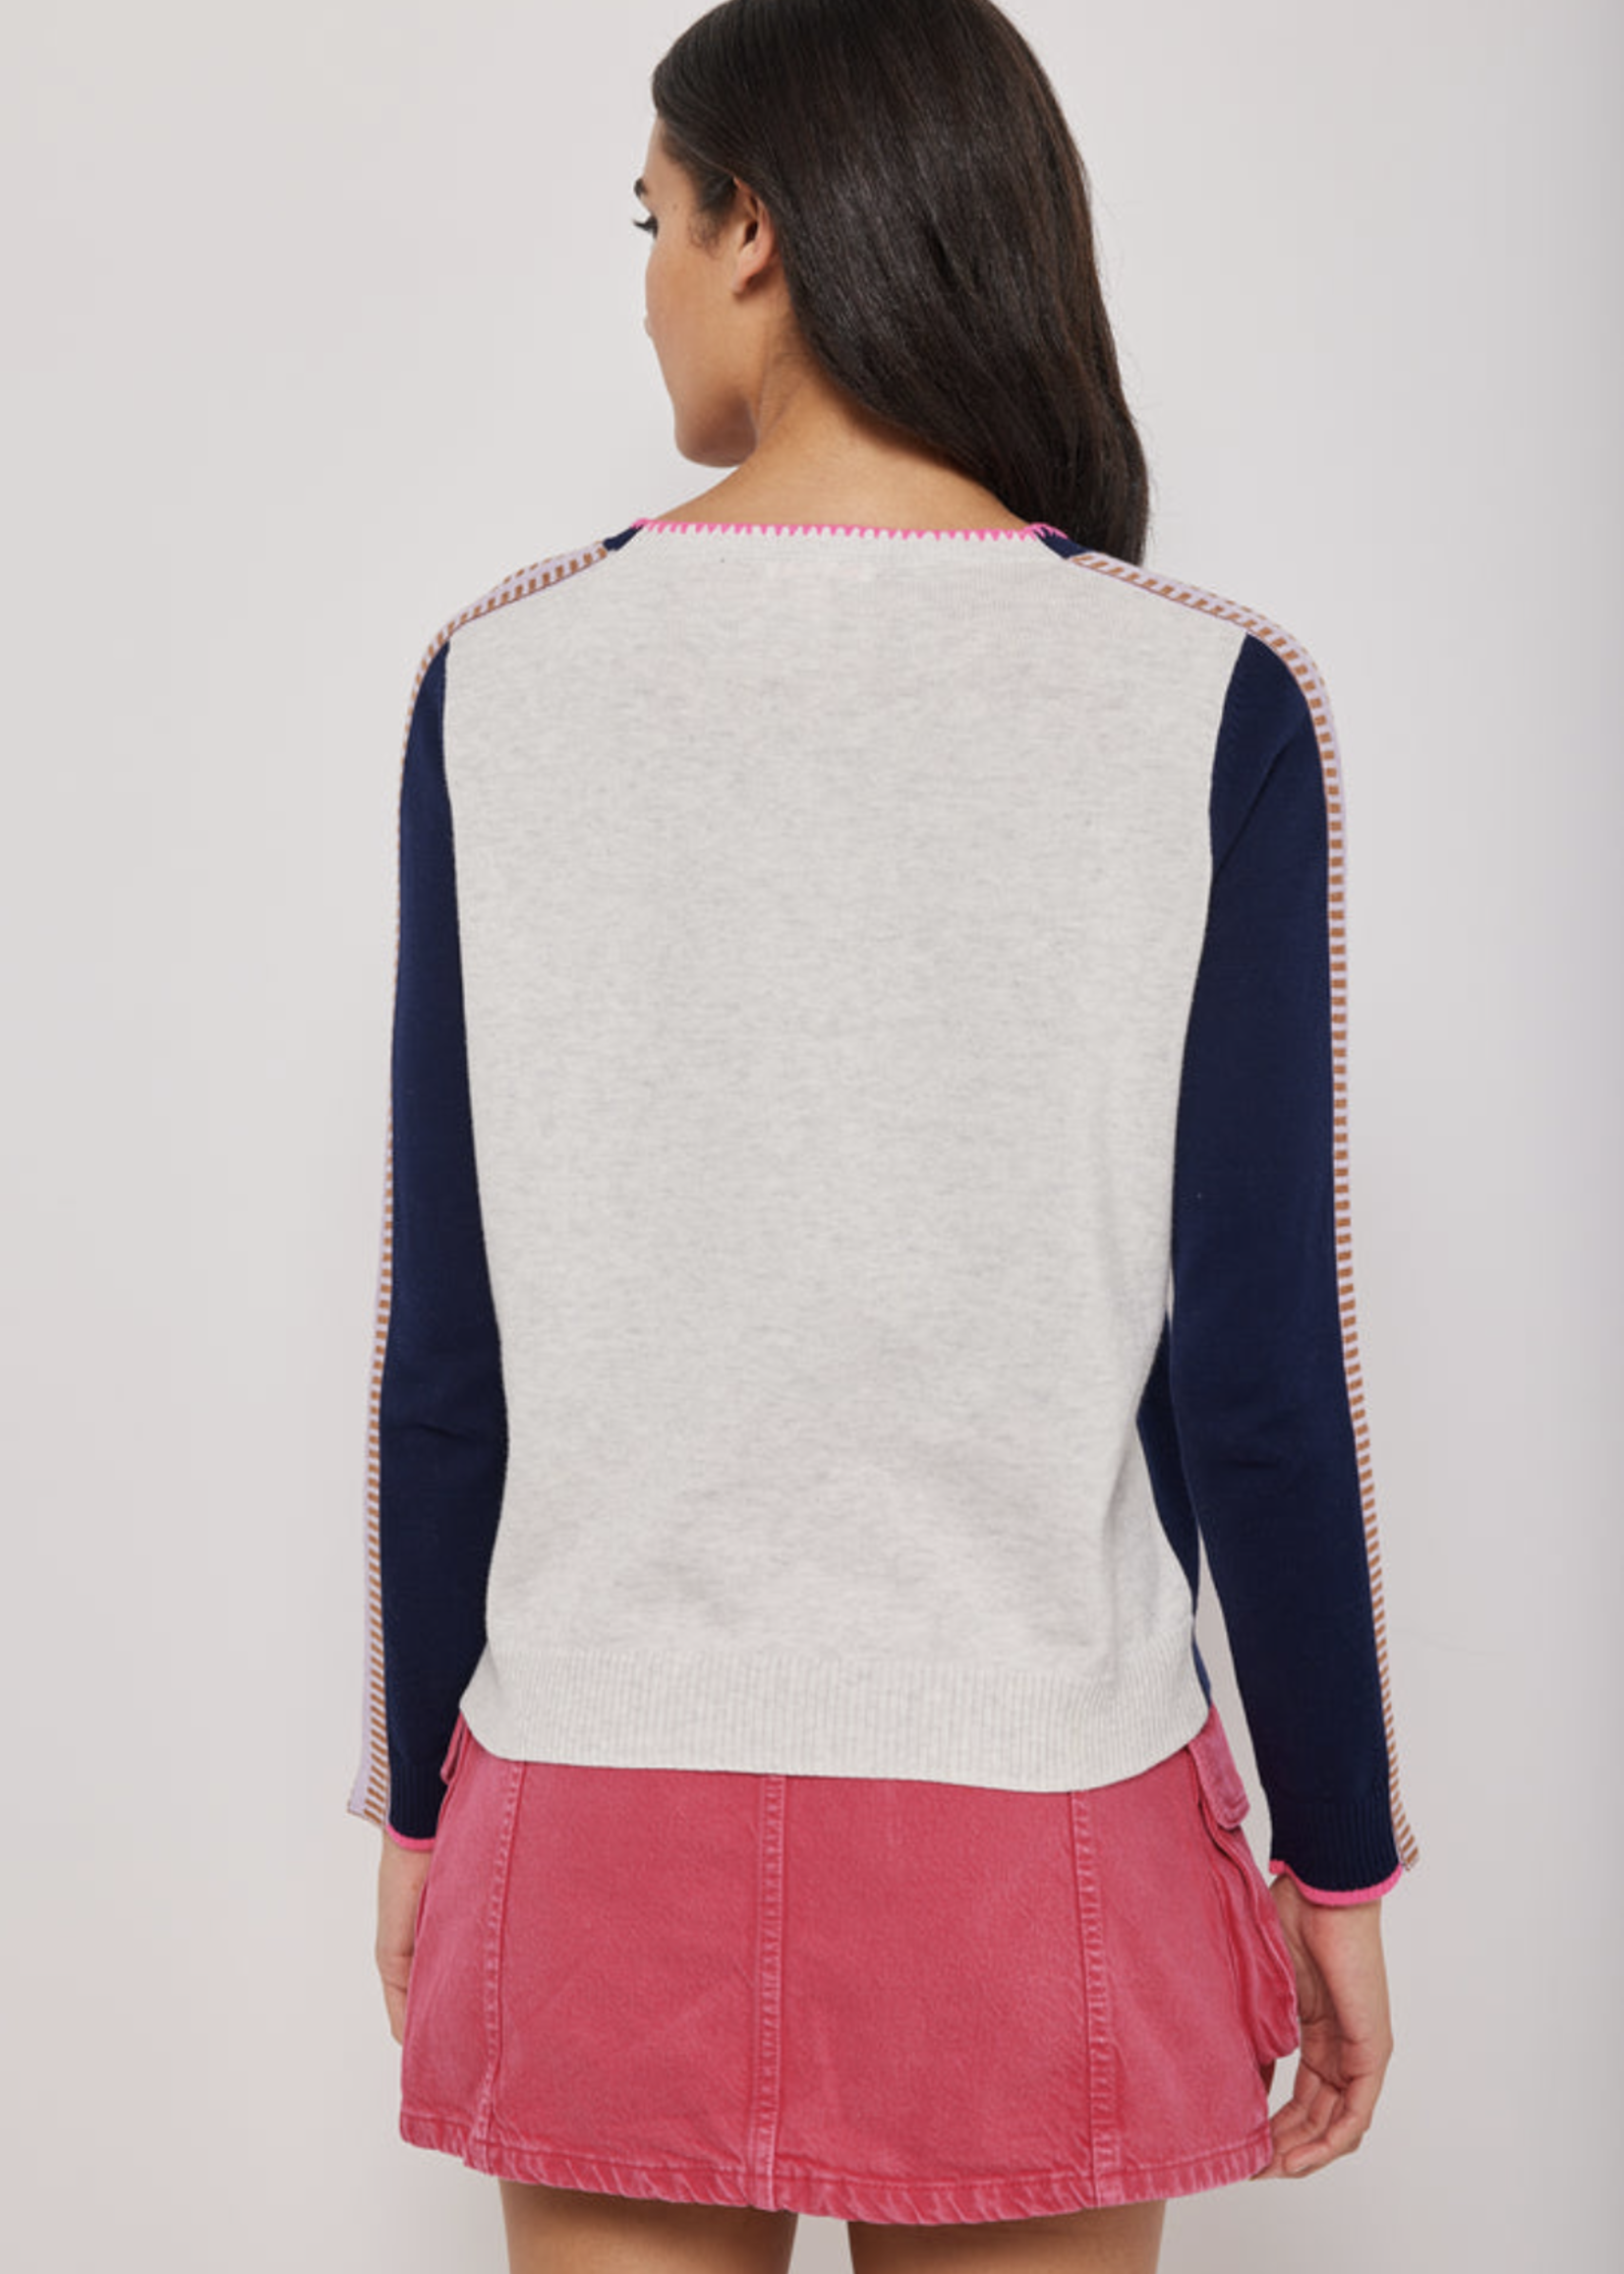 LISA TODD ON TRACK SWEATER